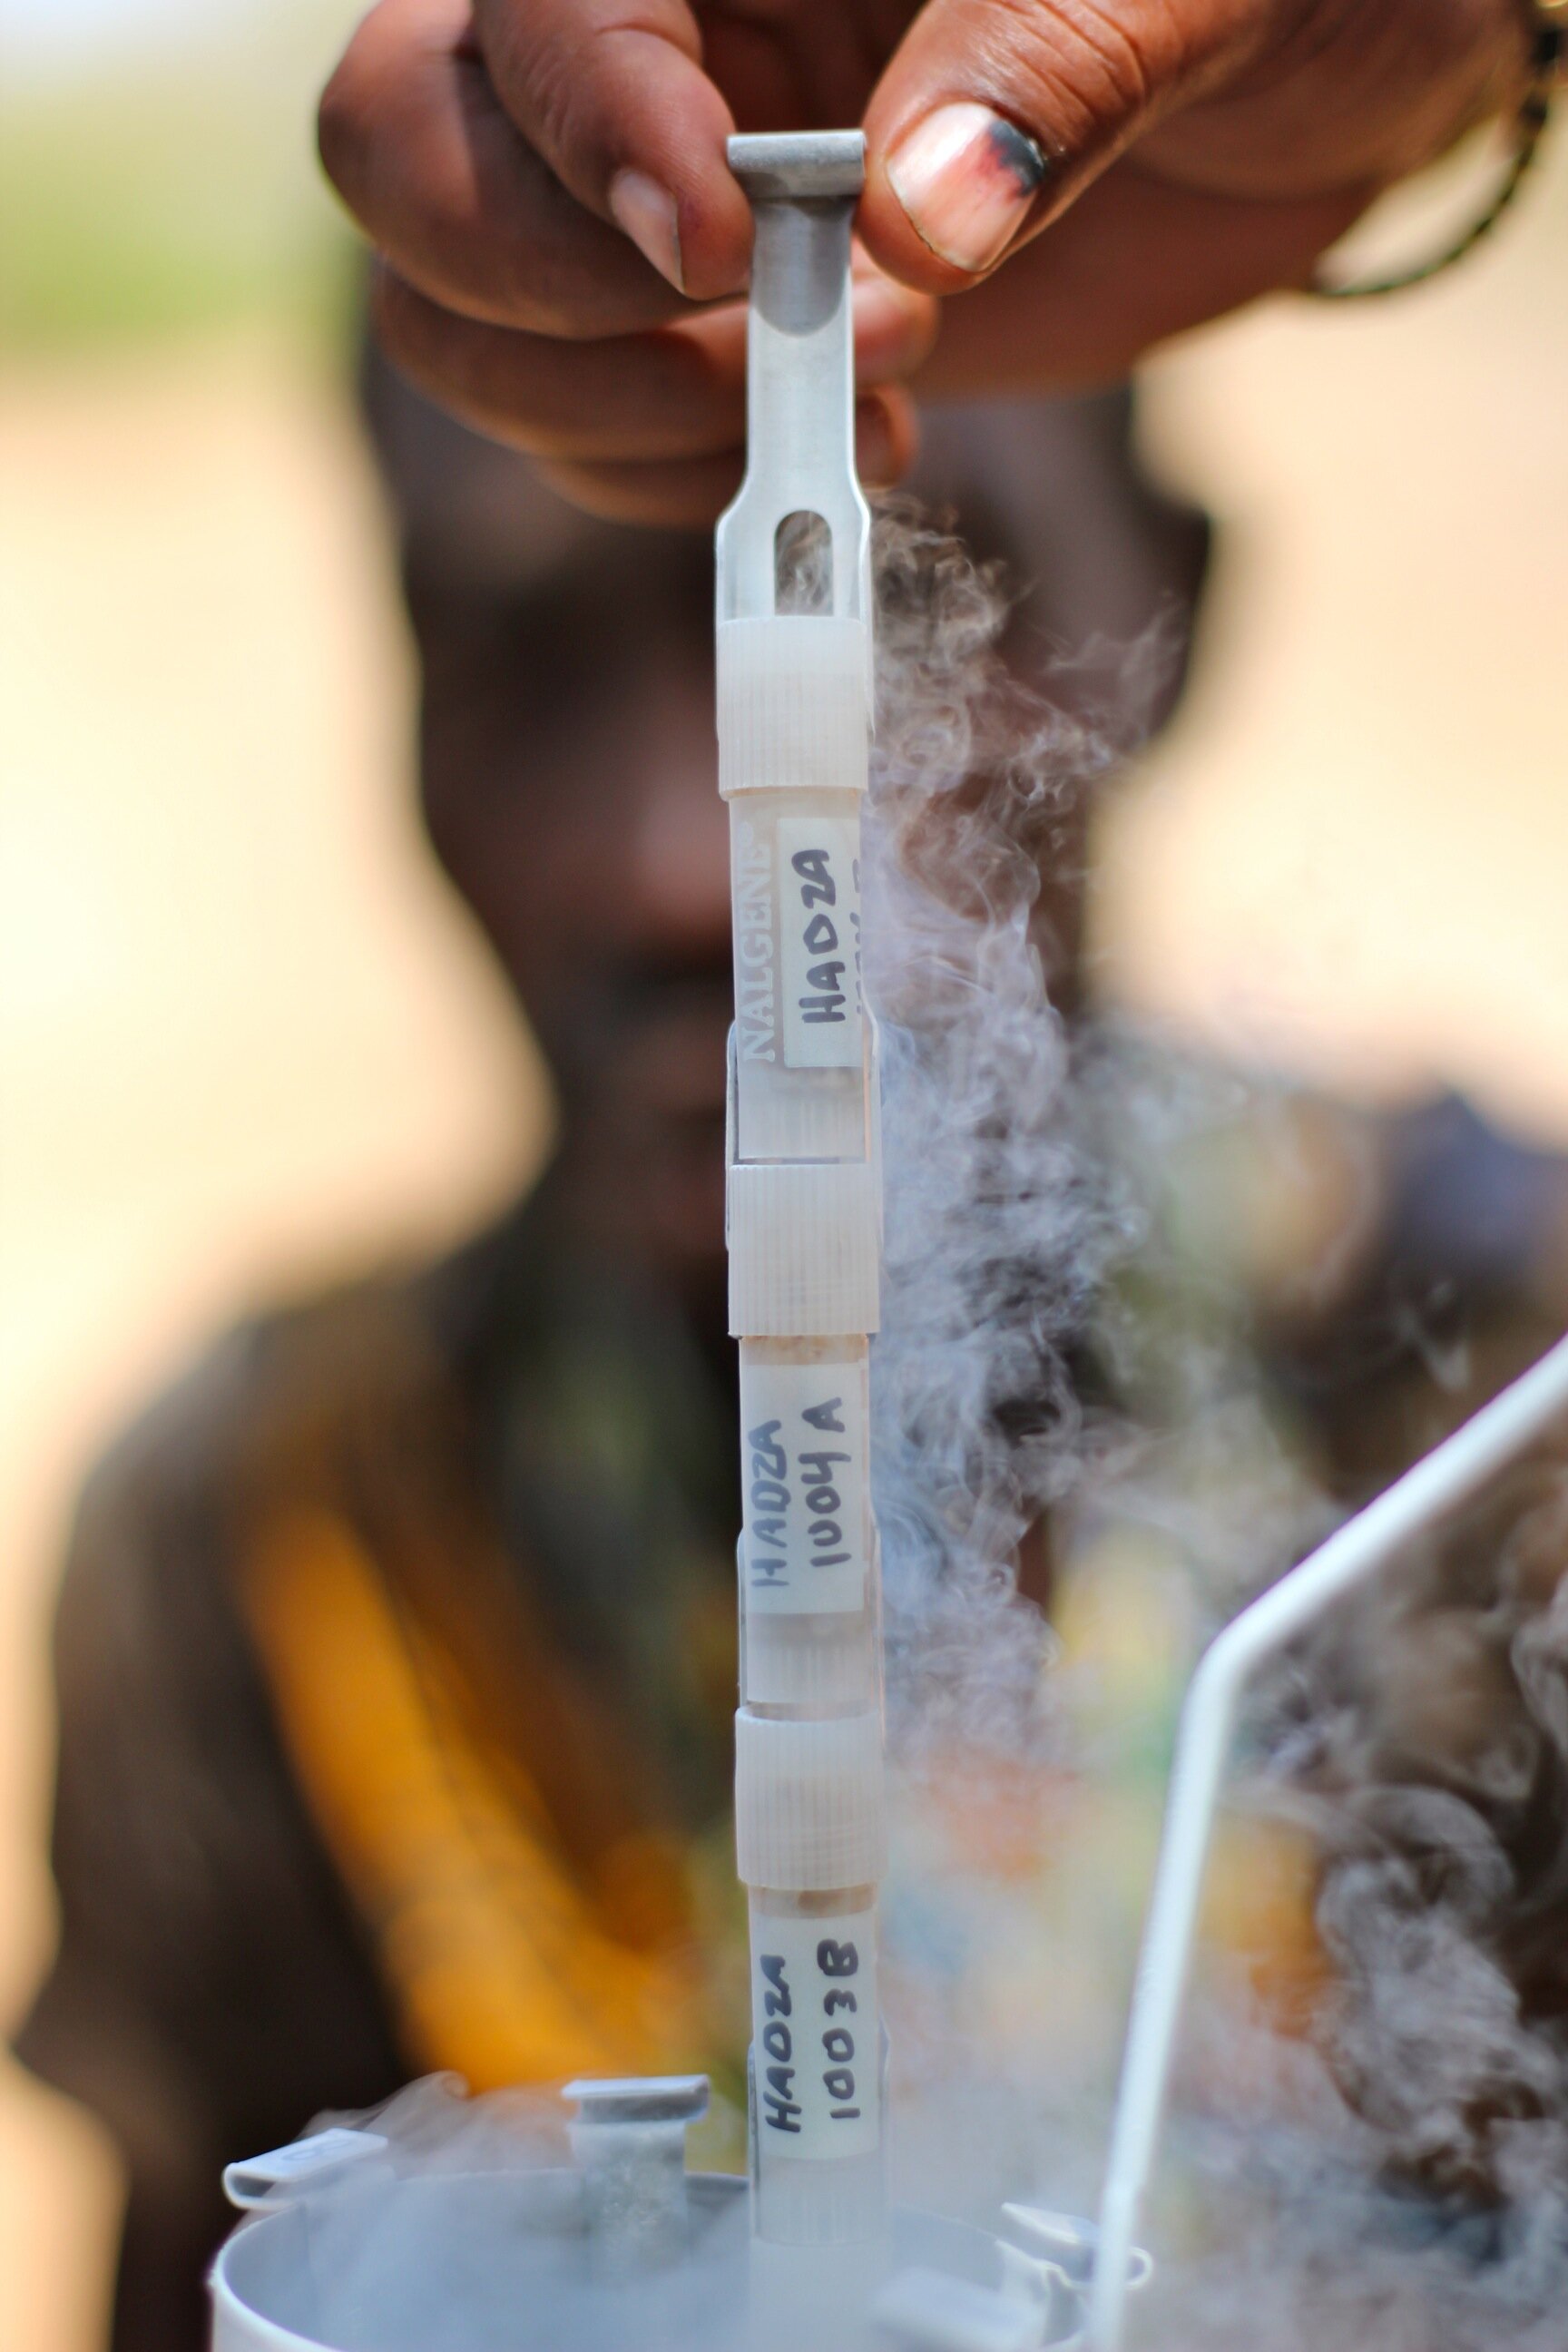 PICTURED: Stool samples taken from the Hadza people are always stored in liquid nitrogen for preservation. These samples helped broaden the American Gut Project horizons to populations that live a more archaic lifestyle.